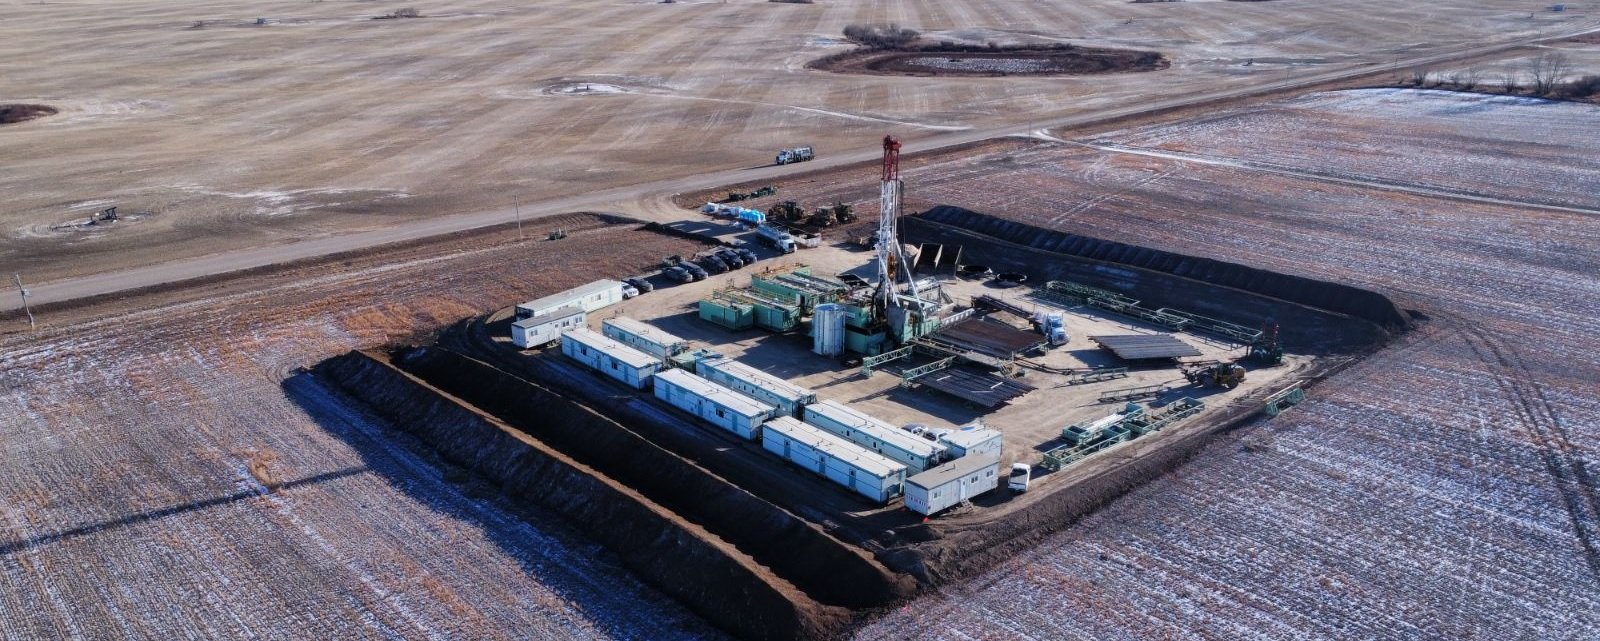 Sonoro rig releases after successful execution of multilateral, multilined horizontal well in Saskatchewan